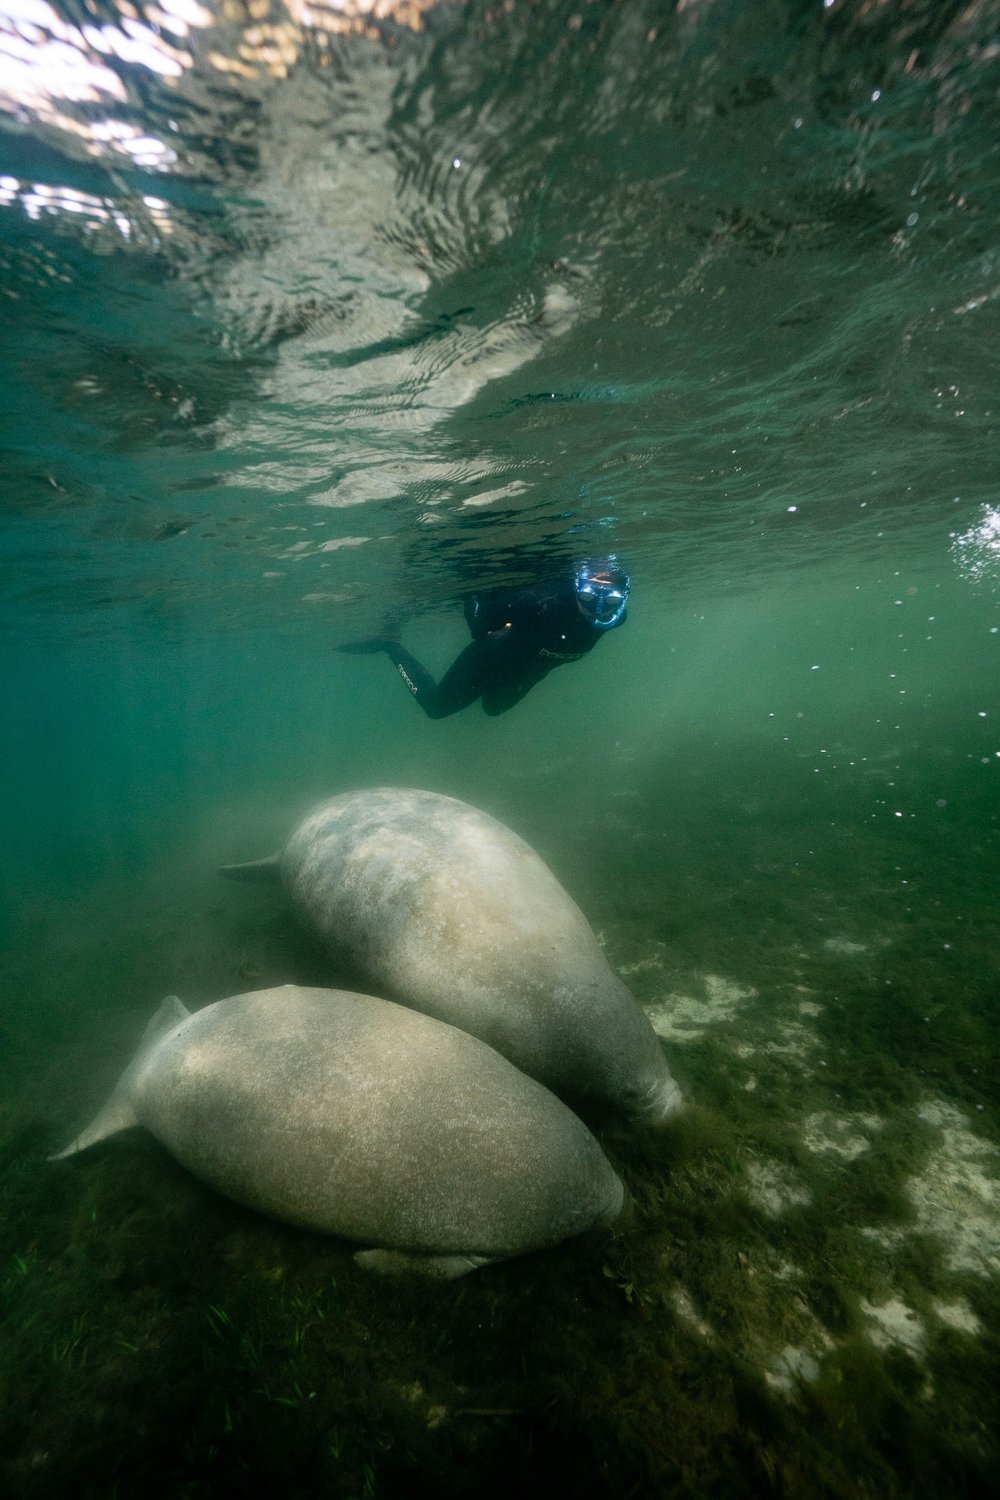 Underwater photographer checking out manatees